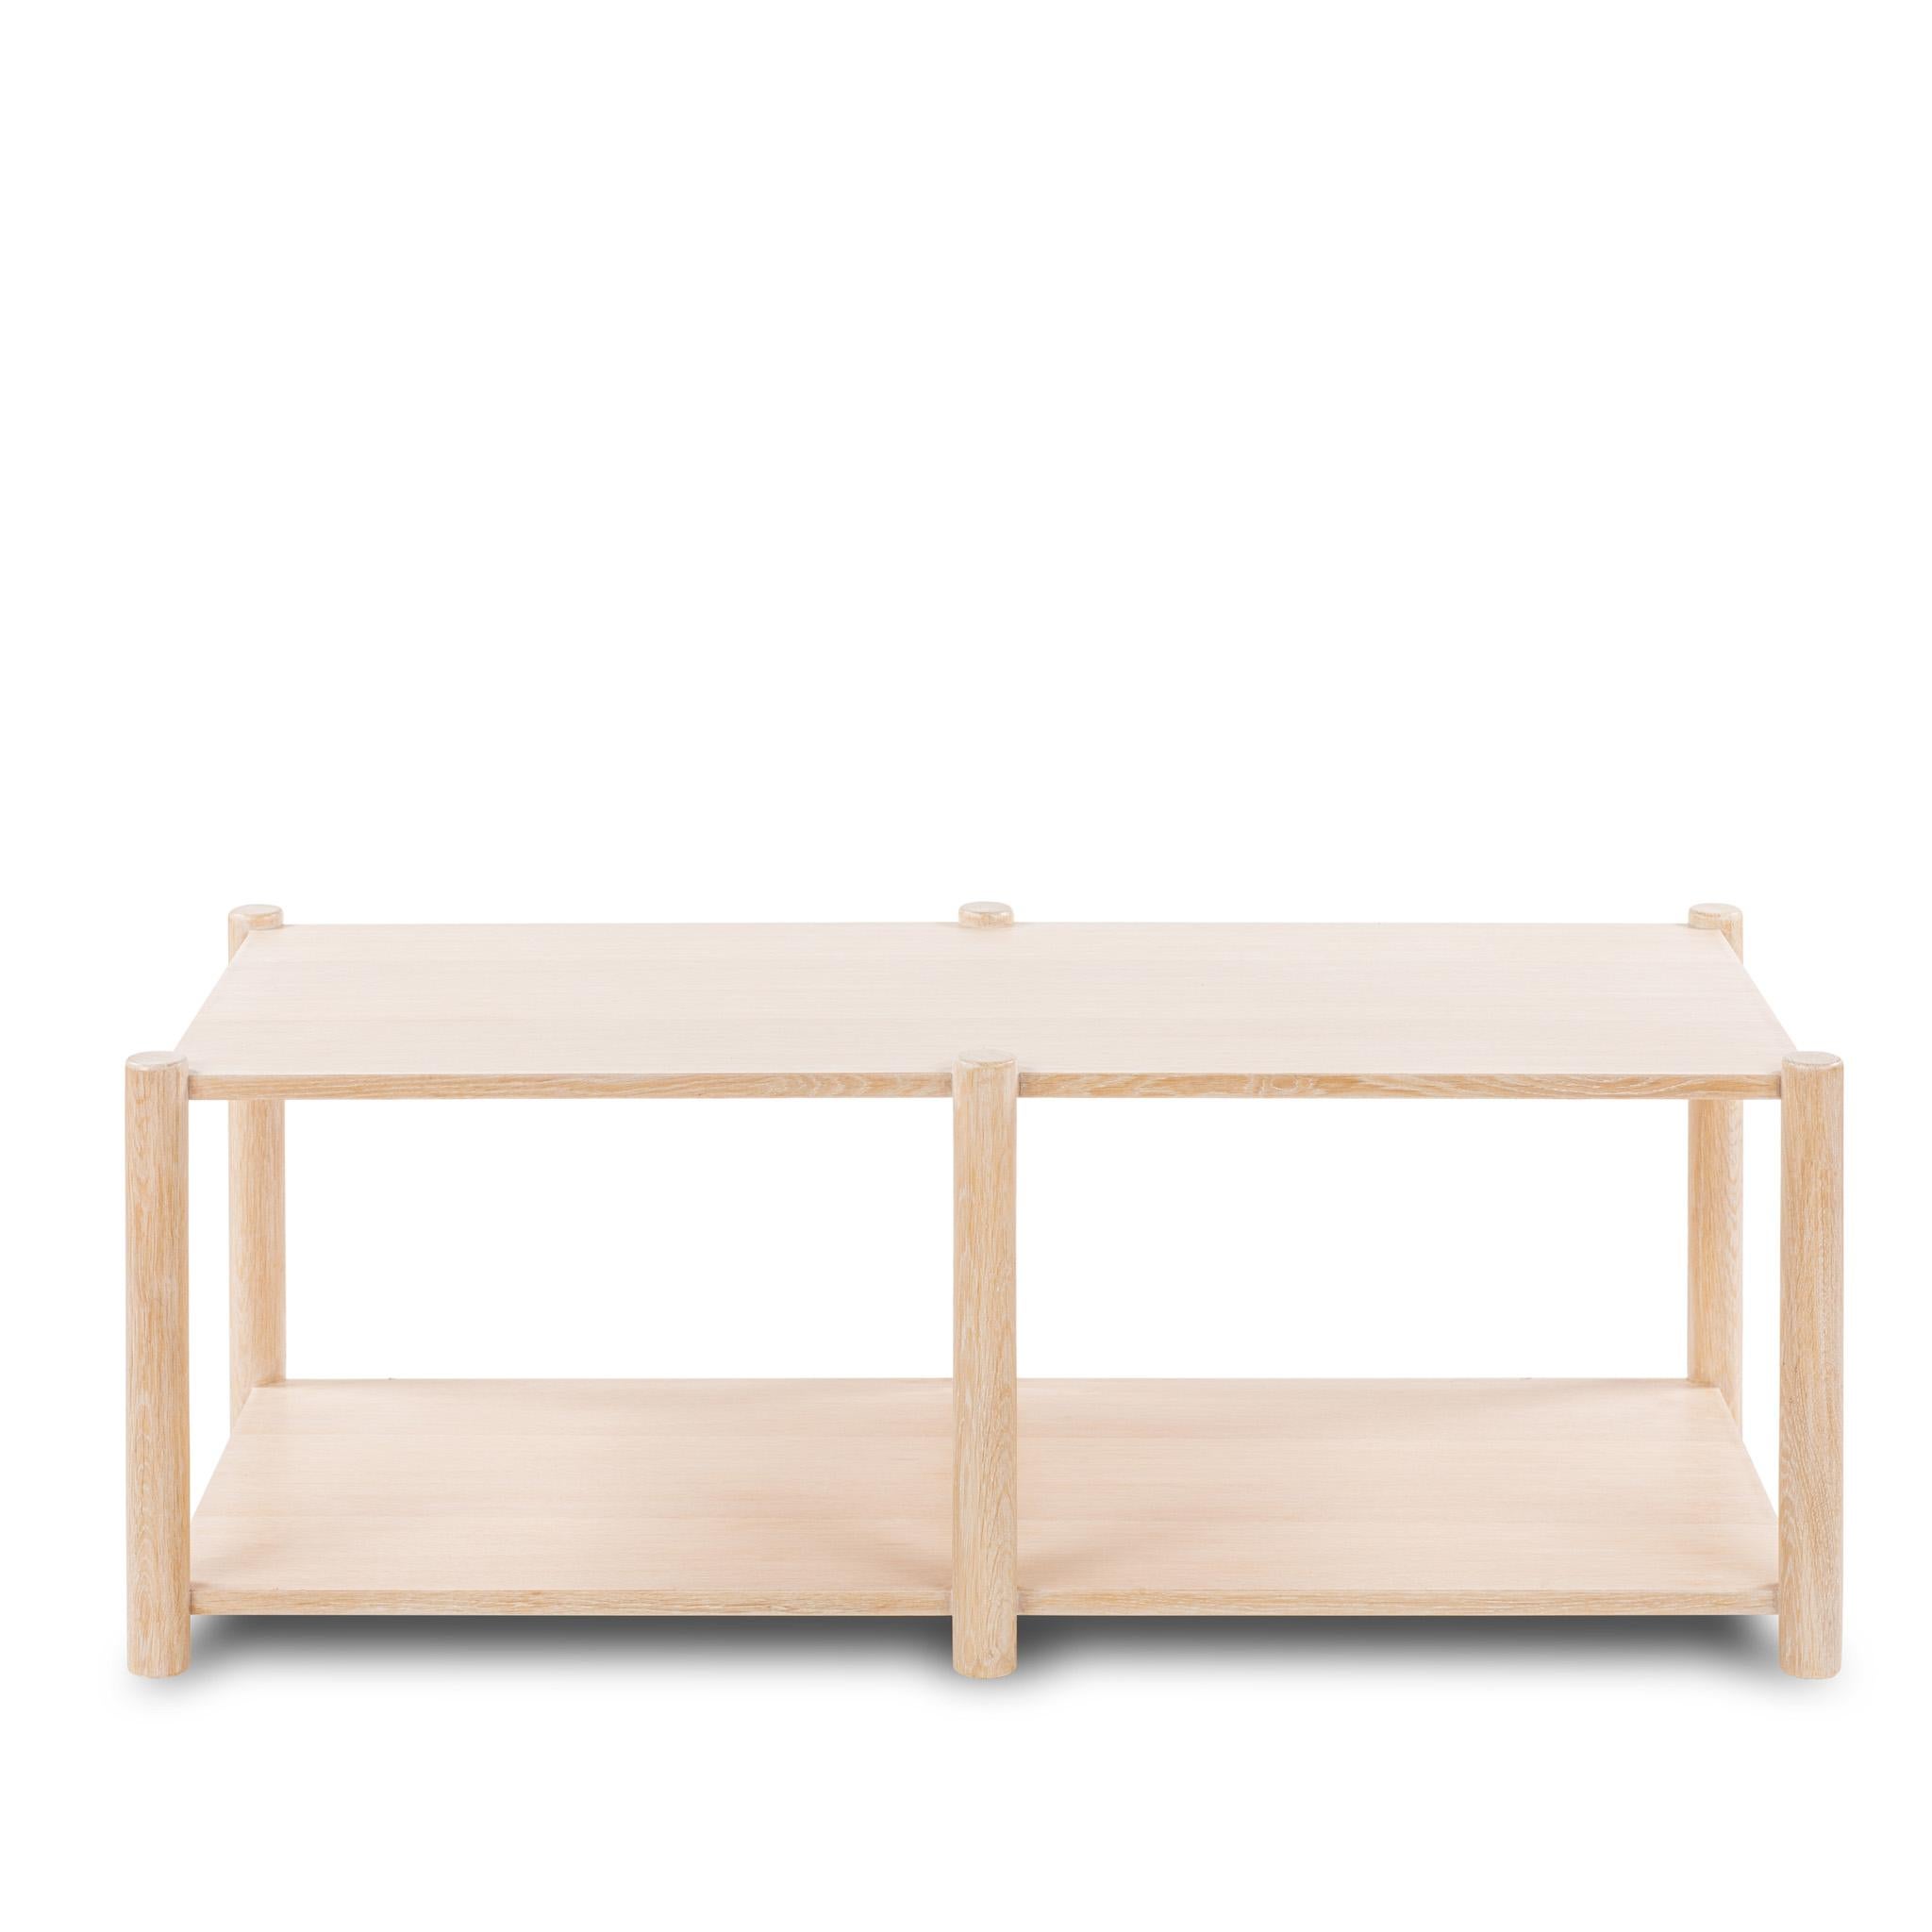 Designed by Josh Greene.
48 x 20 Coffee Table with dowel legs. 
Also available in a 48 x 48 size.